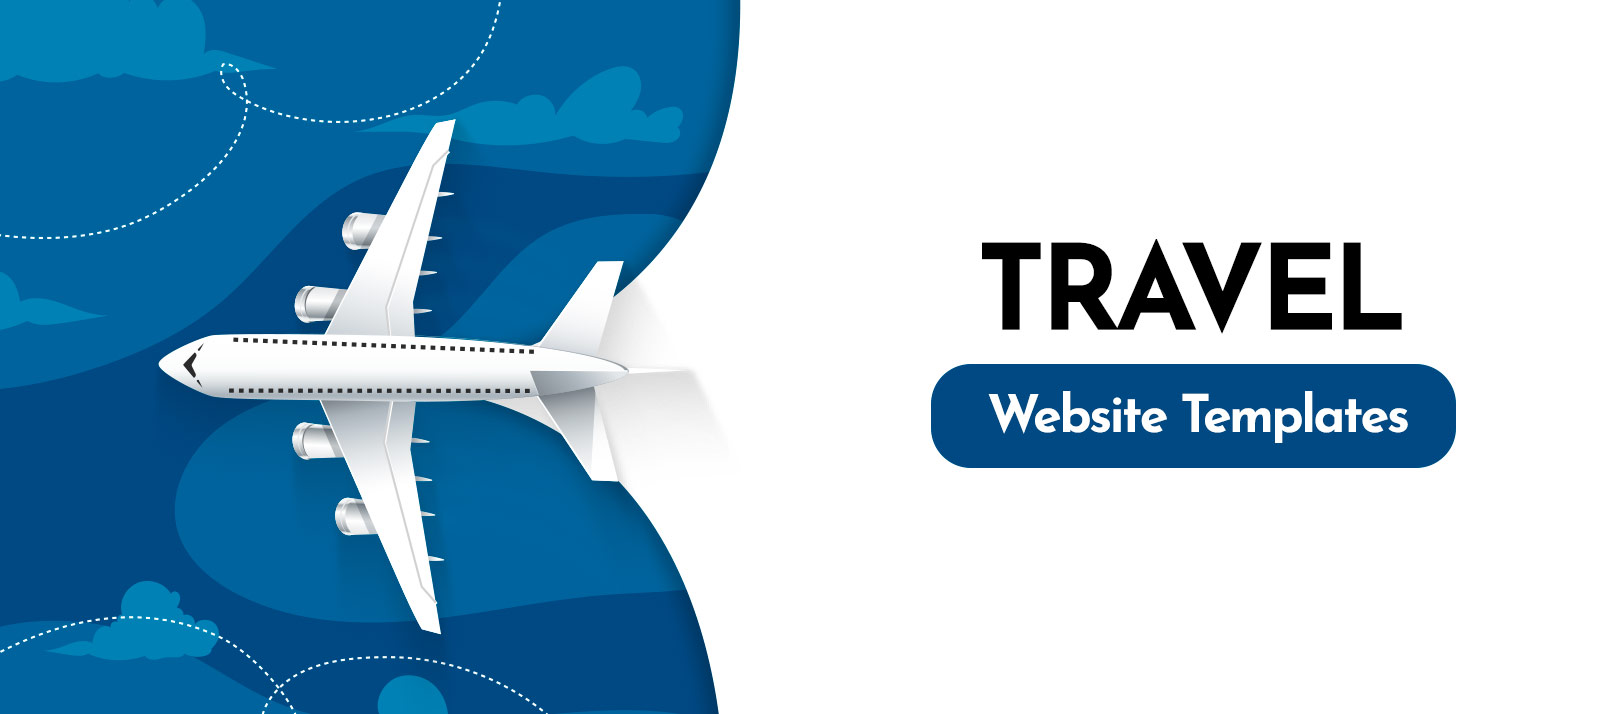  16 Powerful Travel Website Templates For Building Beautiful Travel Websites  